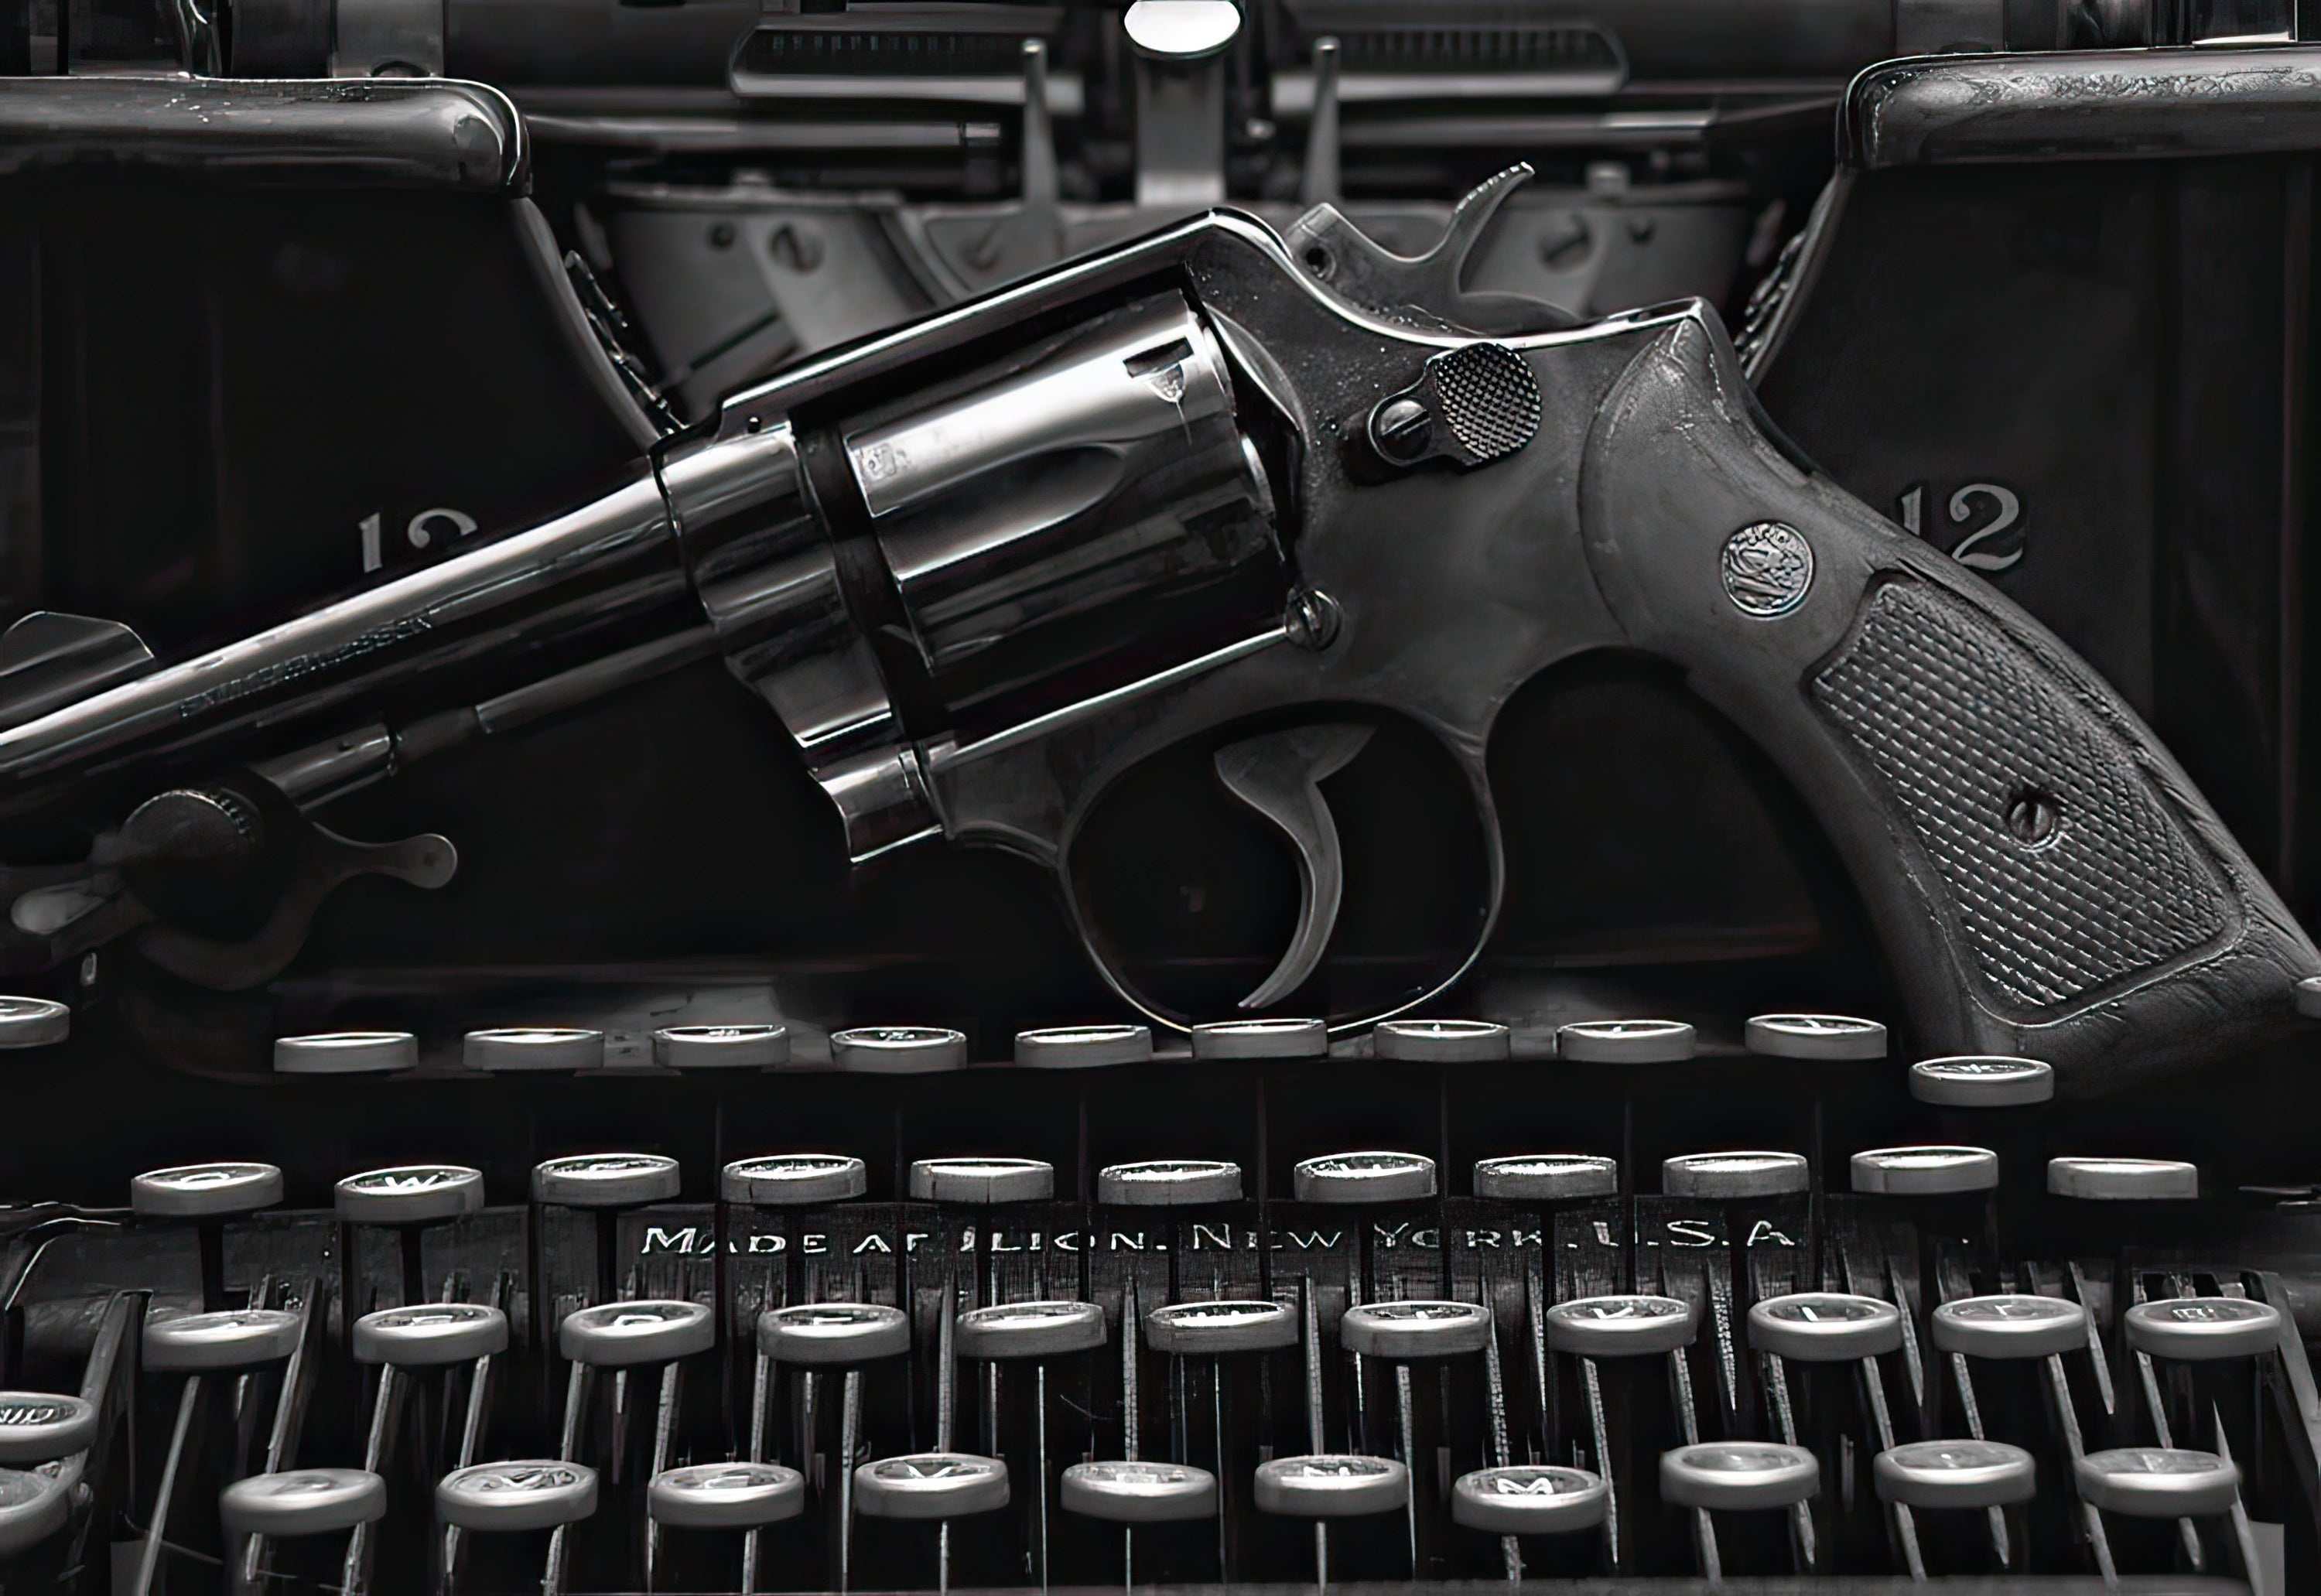 The Life of Crime: Detecting the History of Mysteries and their Creators - Book Review - Image of Gun Resting on Typewriter